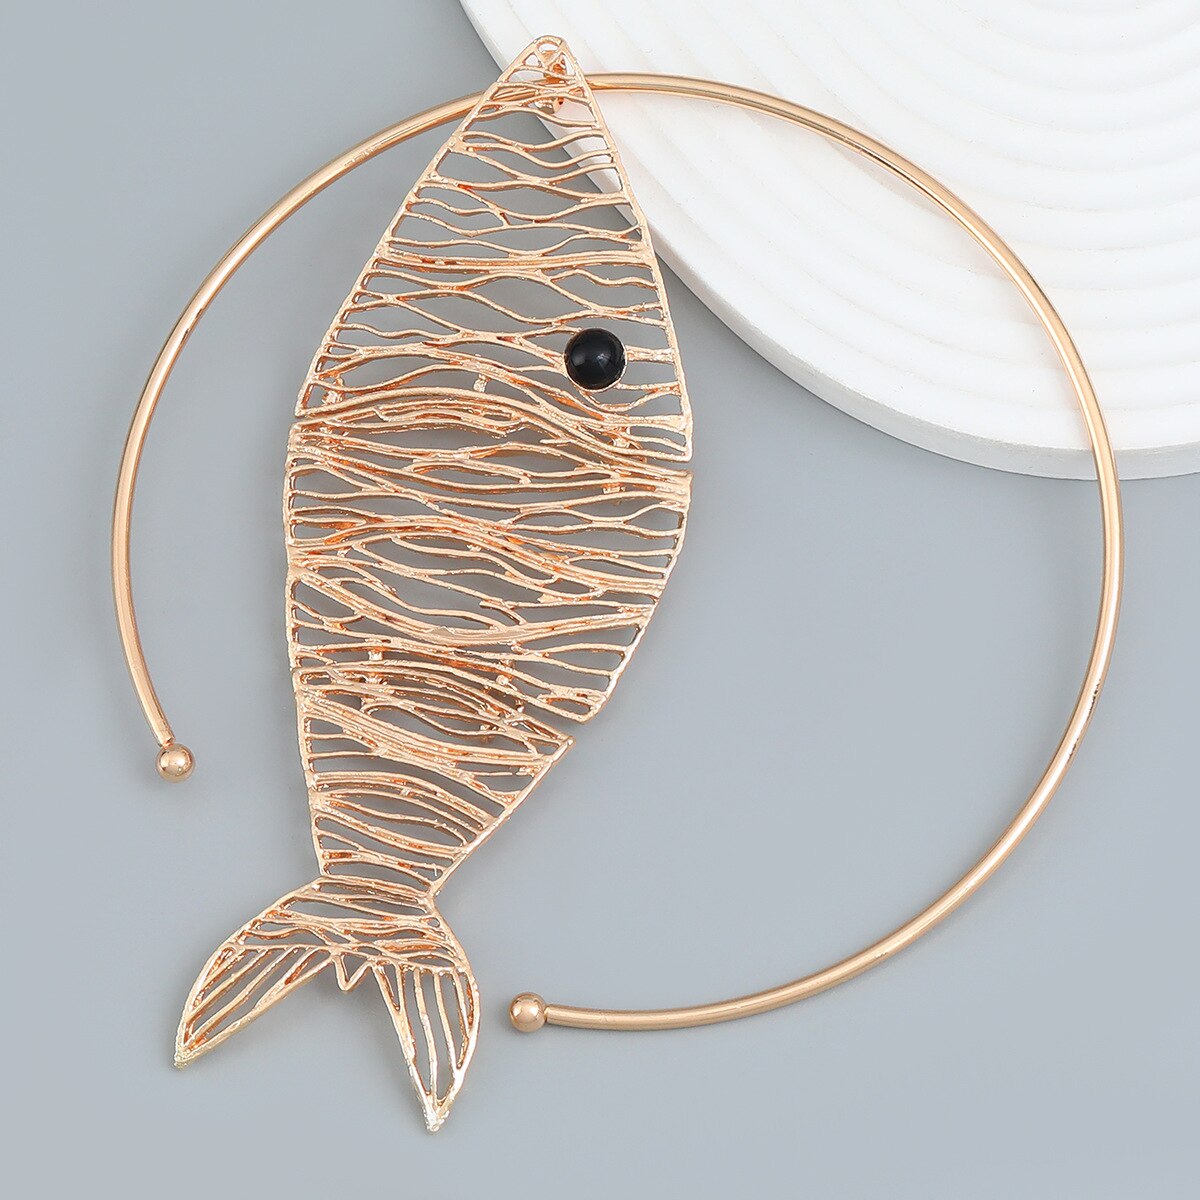 Exquisite Handmade Fish-Shaped Choker Necklace Earrings